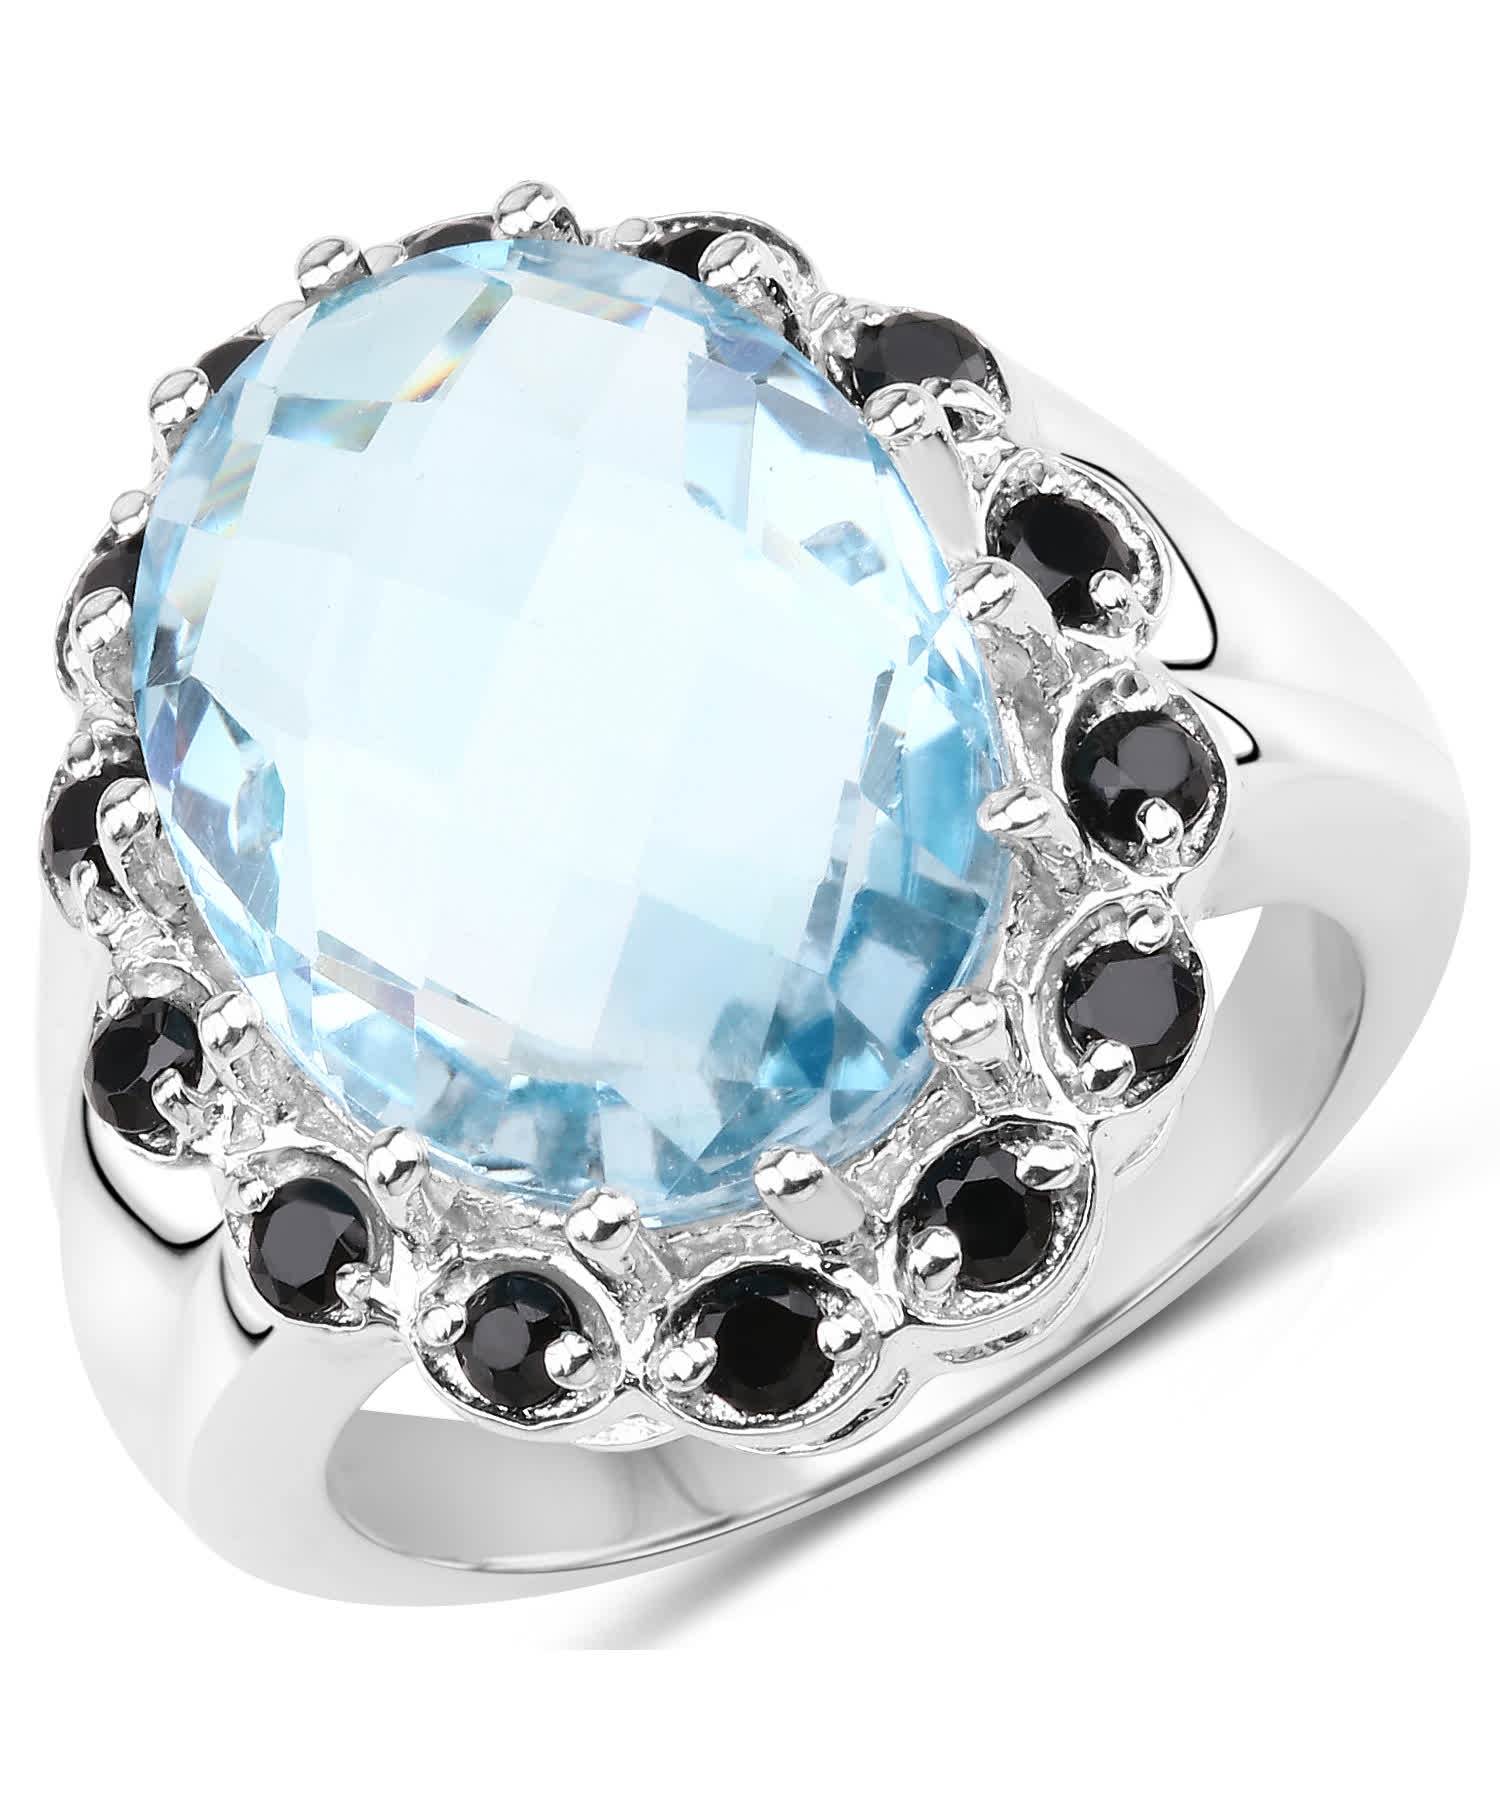 12.49ctw Natural Swiss Blue Topaz and Black Spinel Rhodium Plated 925 Sterling Silver Halo Cocktail Ring View 1